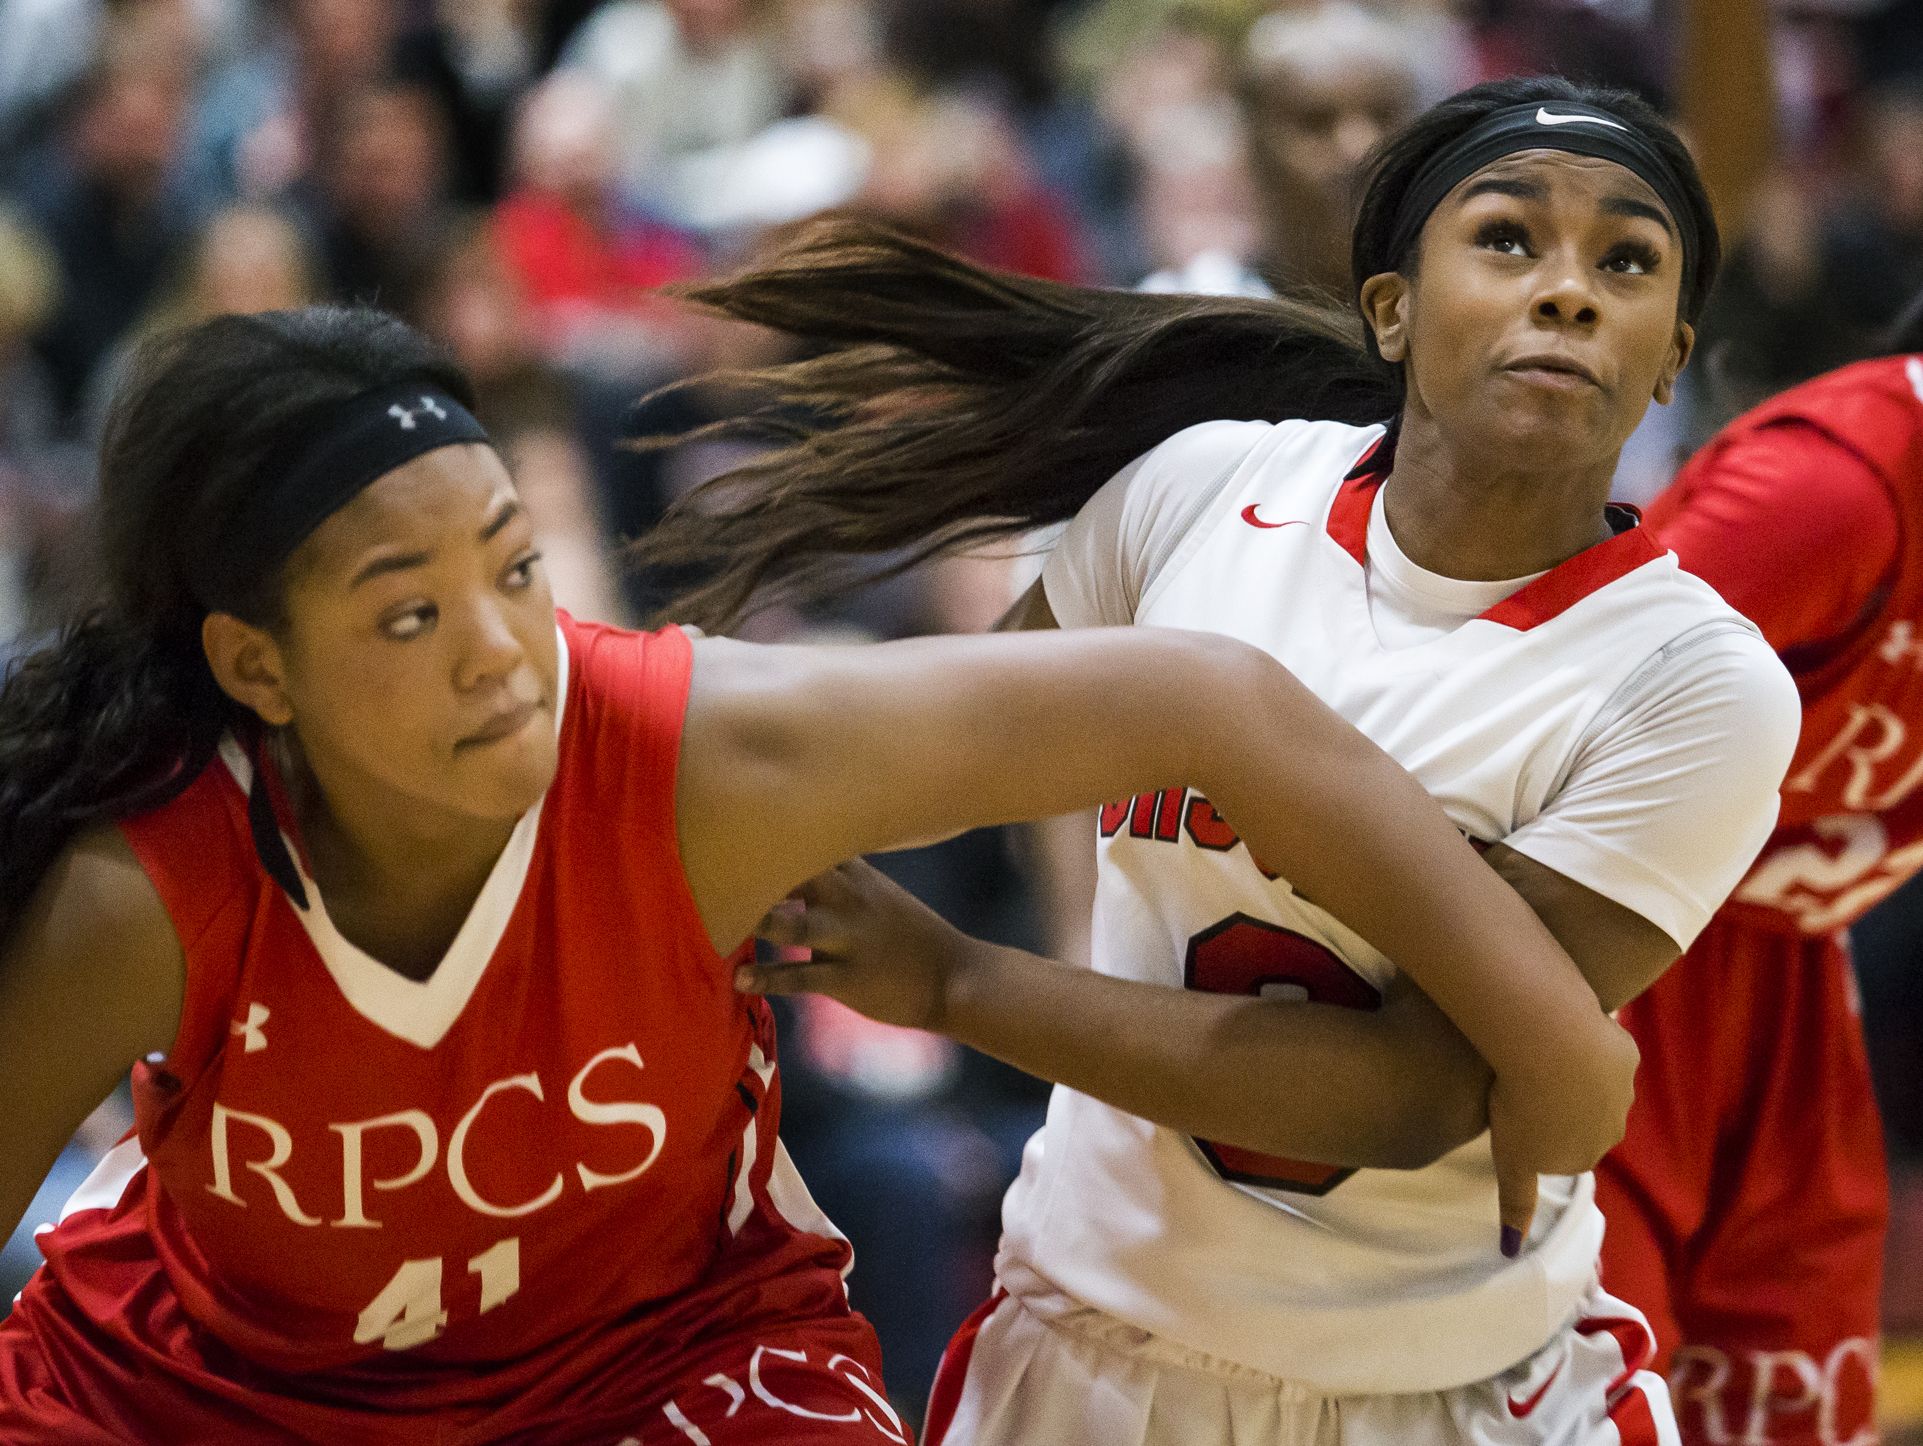 Ursuline's Yanni Hendley-Mccalla fights for rebound position with Roland Park's Christyn Robinson (left) in the second half of Ursuline Academy's 47-40 win over Roland Park Country School in the Diamond State Classic at St. Elizabeth High School in Wilmington on Friday evening.